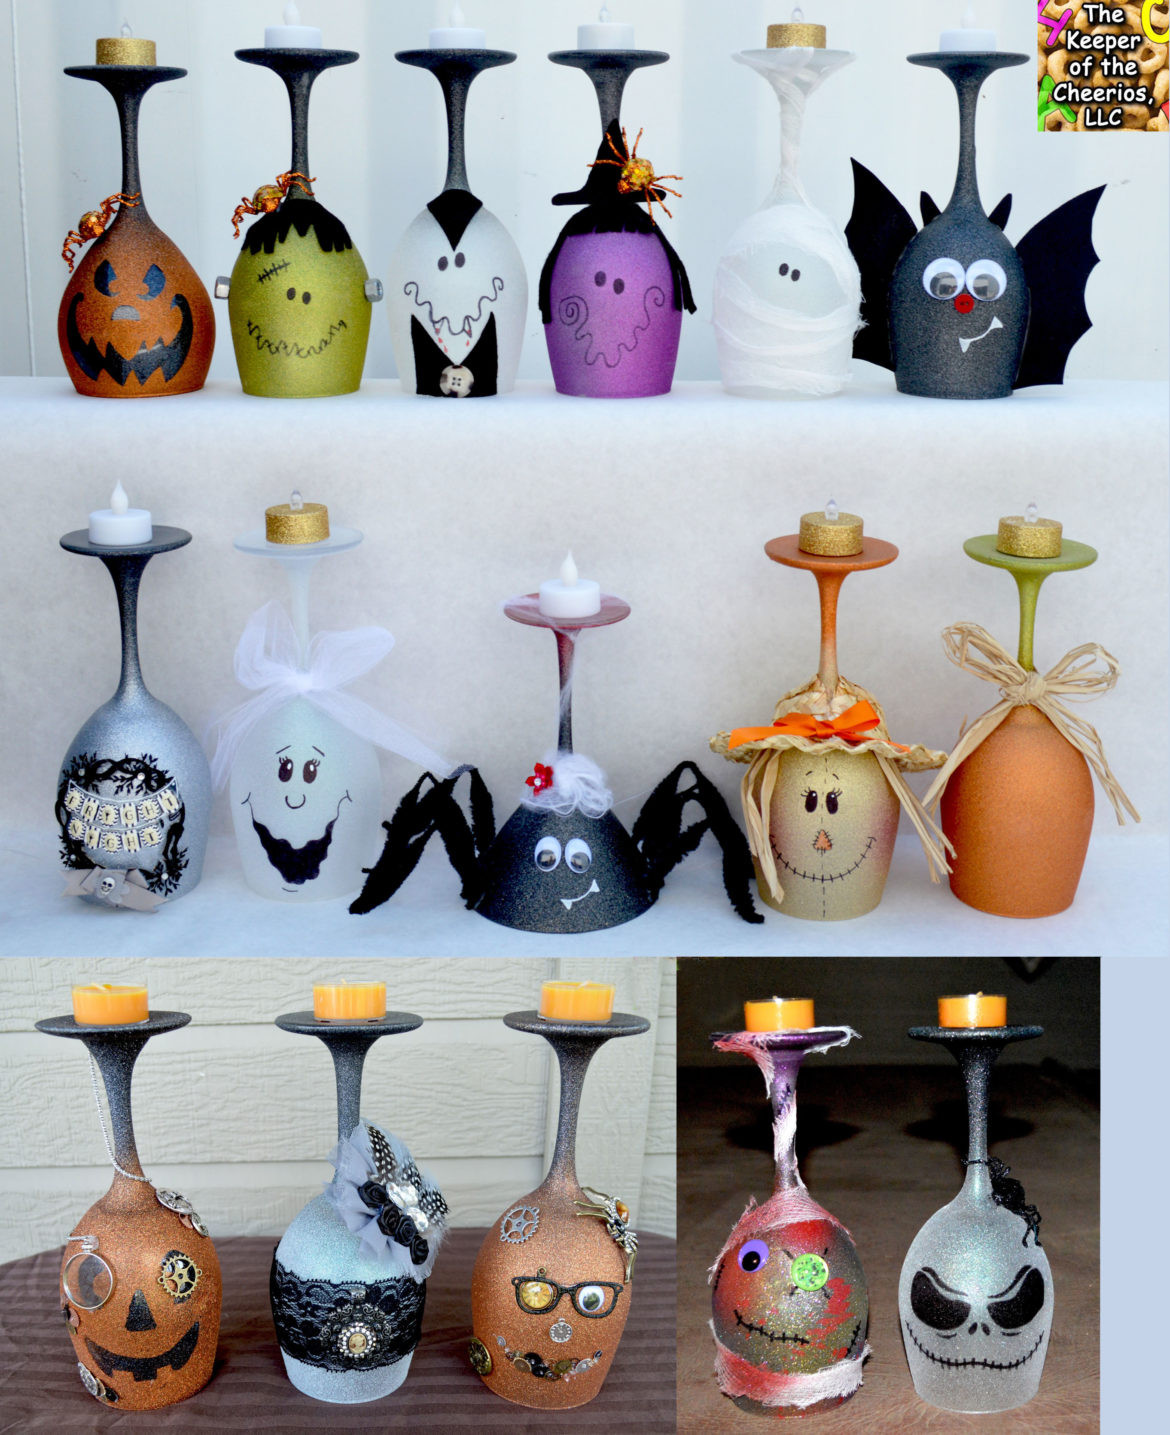 Group Craft Ideas For Adults
 HALLOWEEN WINE GLASS CANDLE HOLDERS The Keeper of the